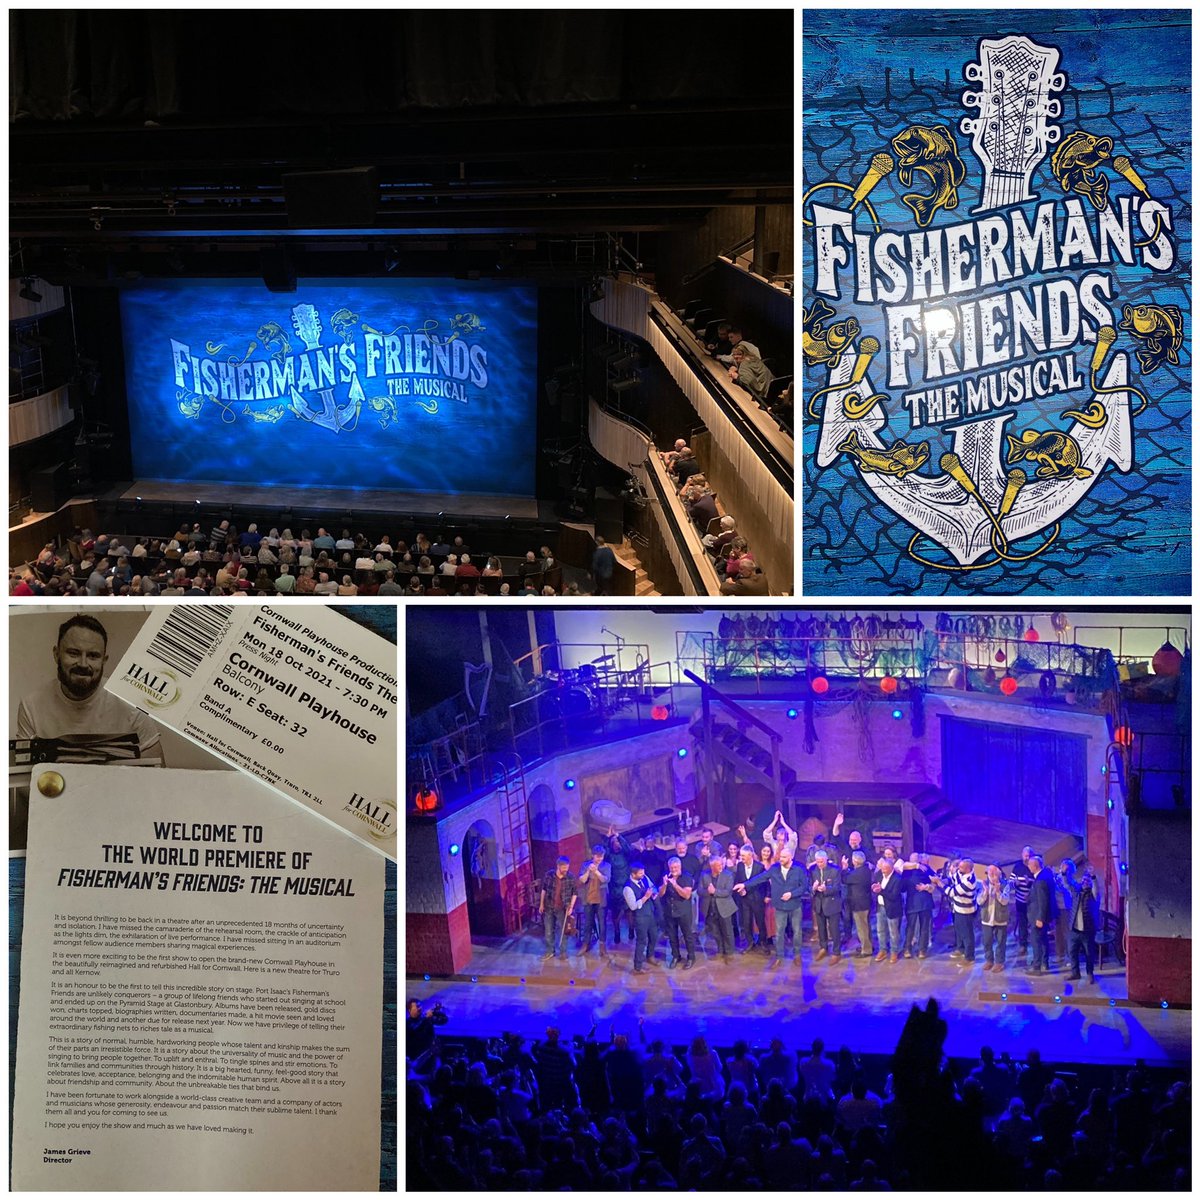  Fisherman's Friends: The Musical